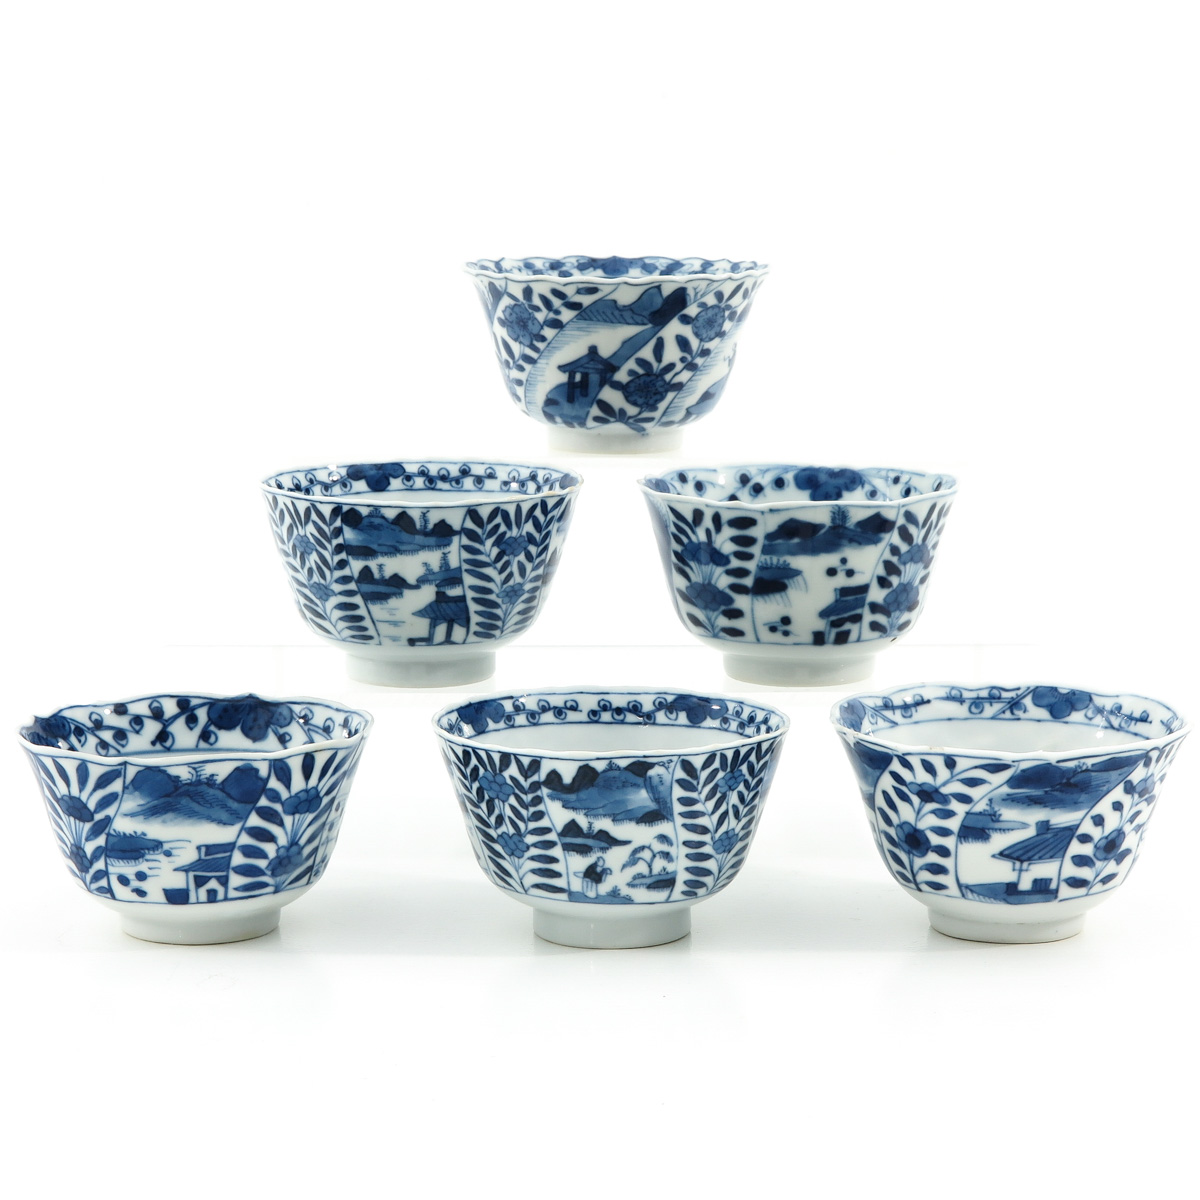 A Set of 6 Cups and Saucers - Image 2 of 10